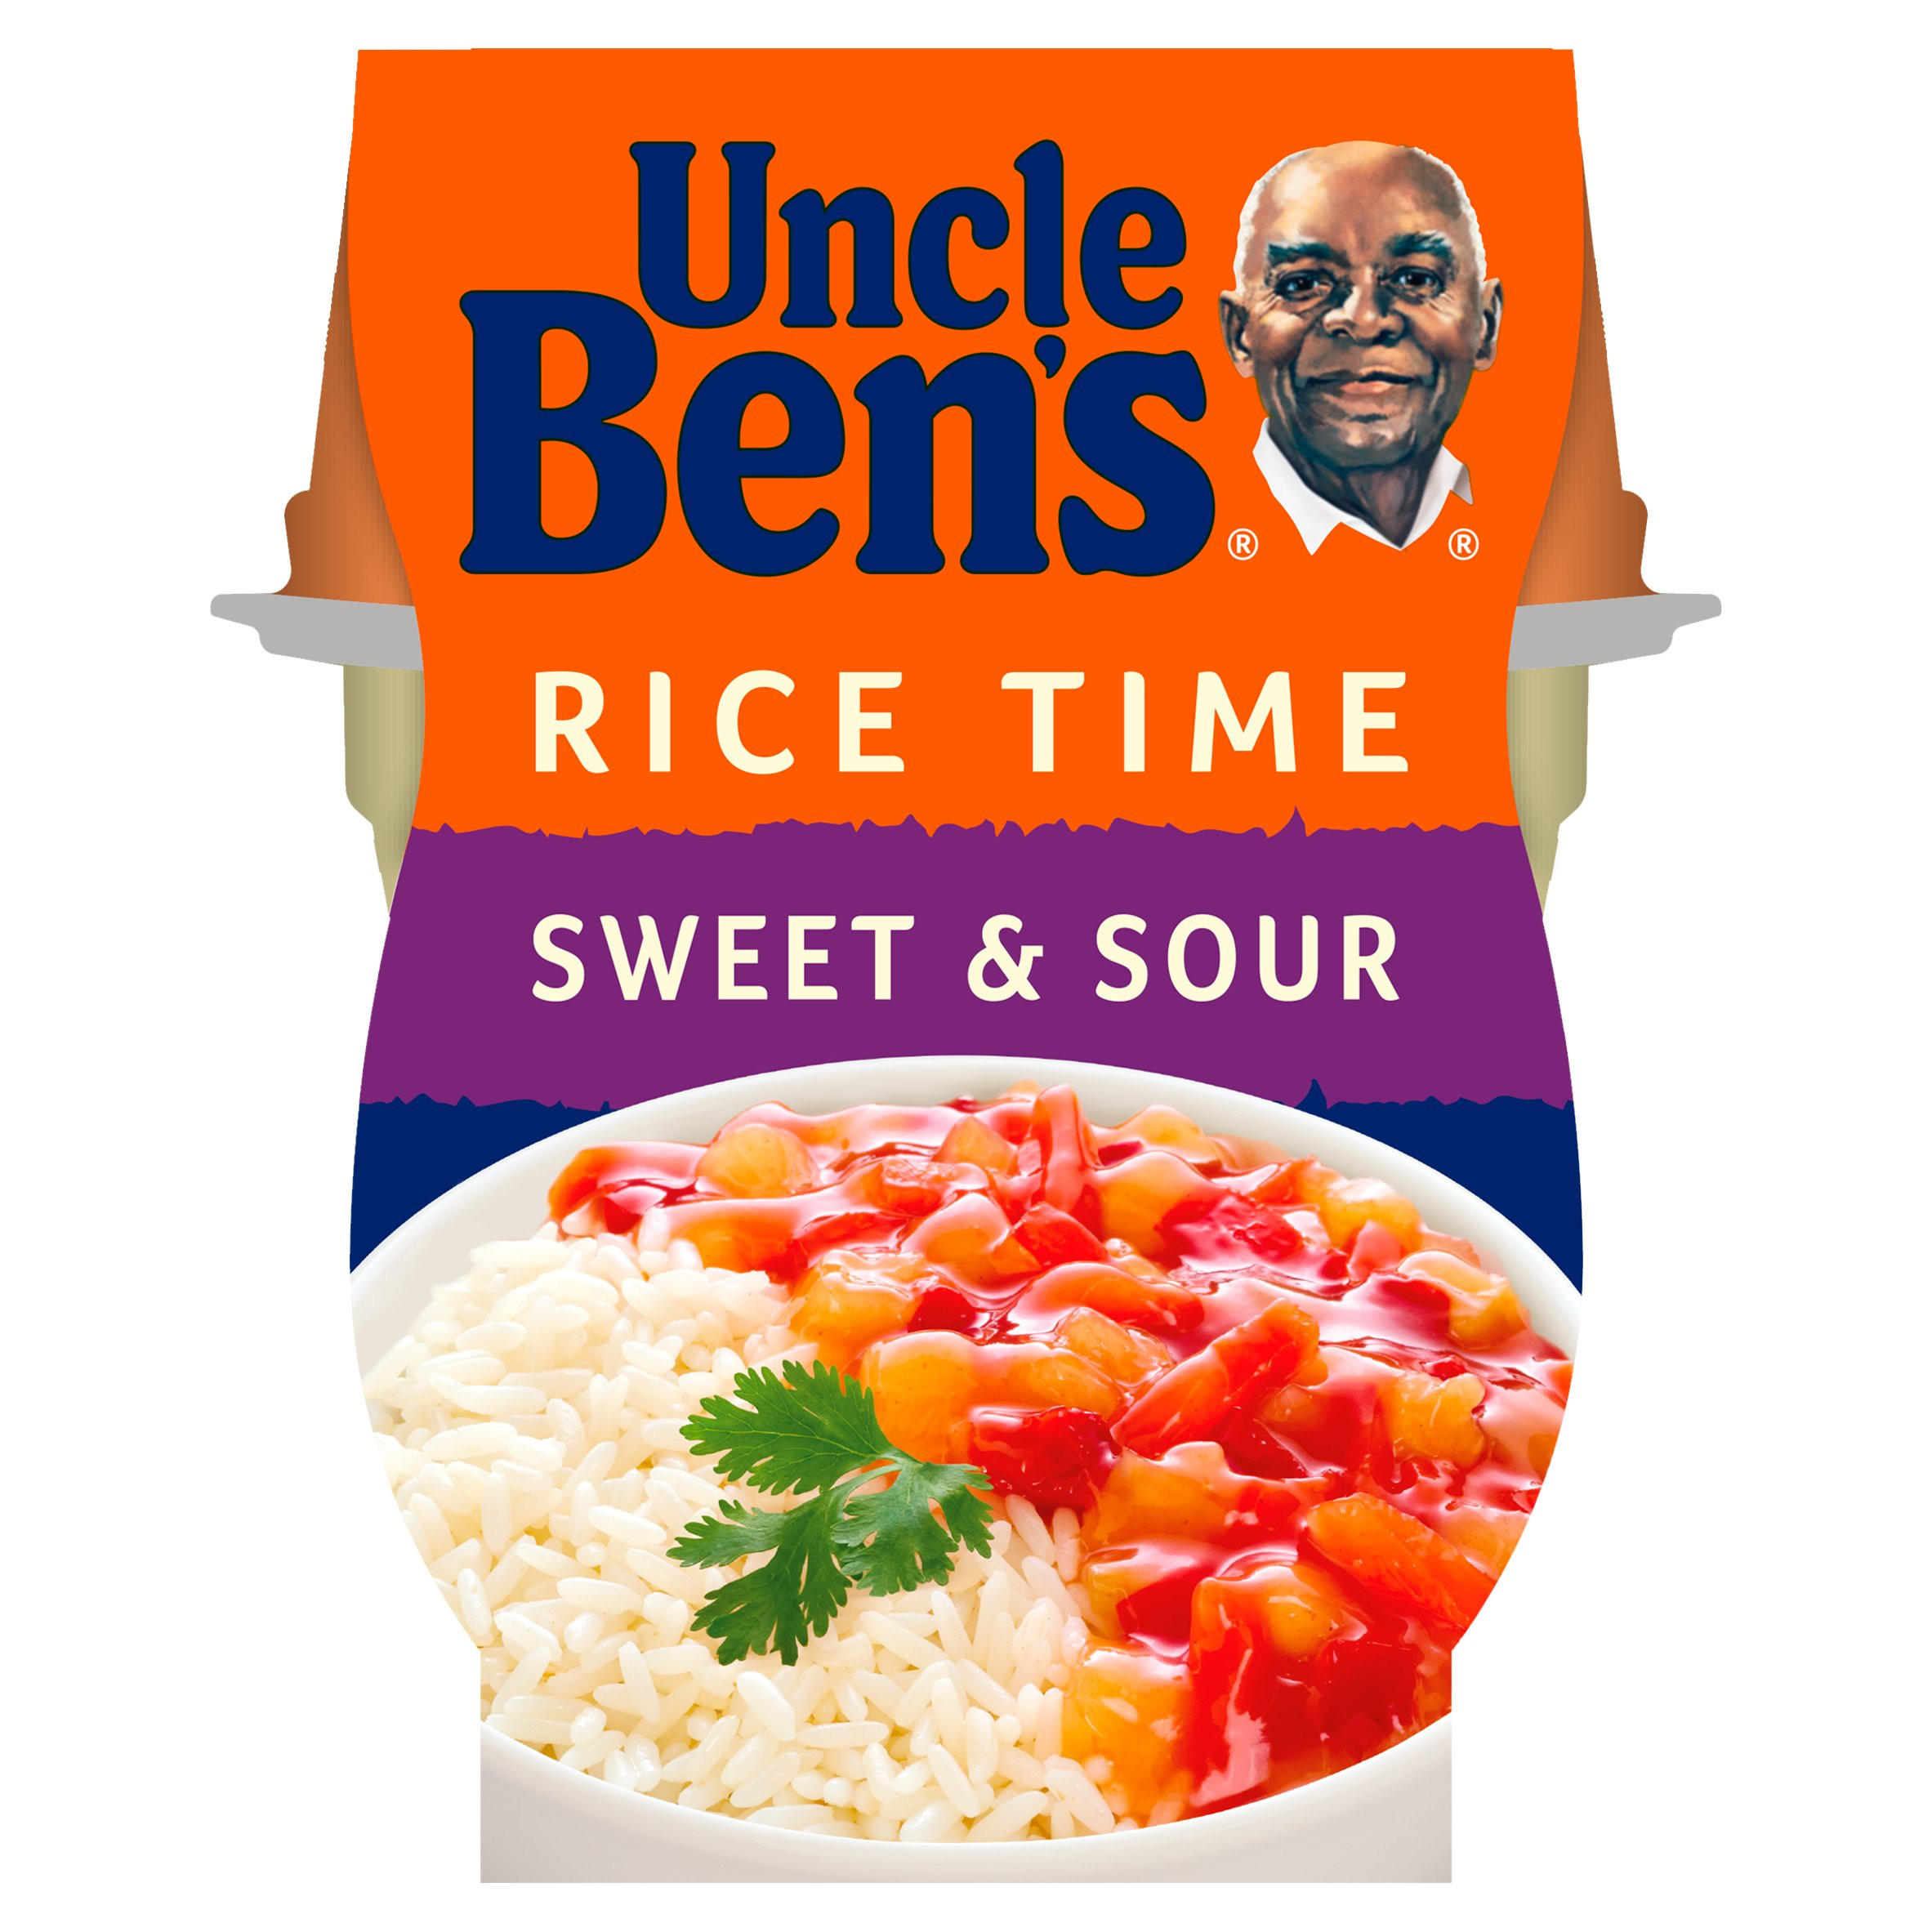 Save time & money with Uncle Bens - Premier Quality Foods